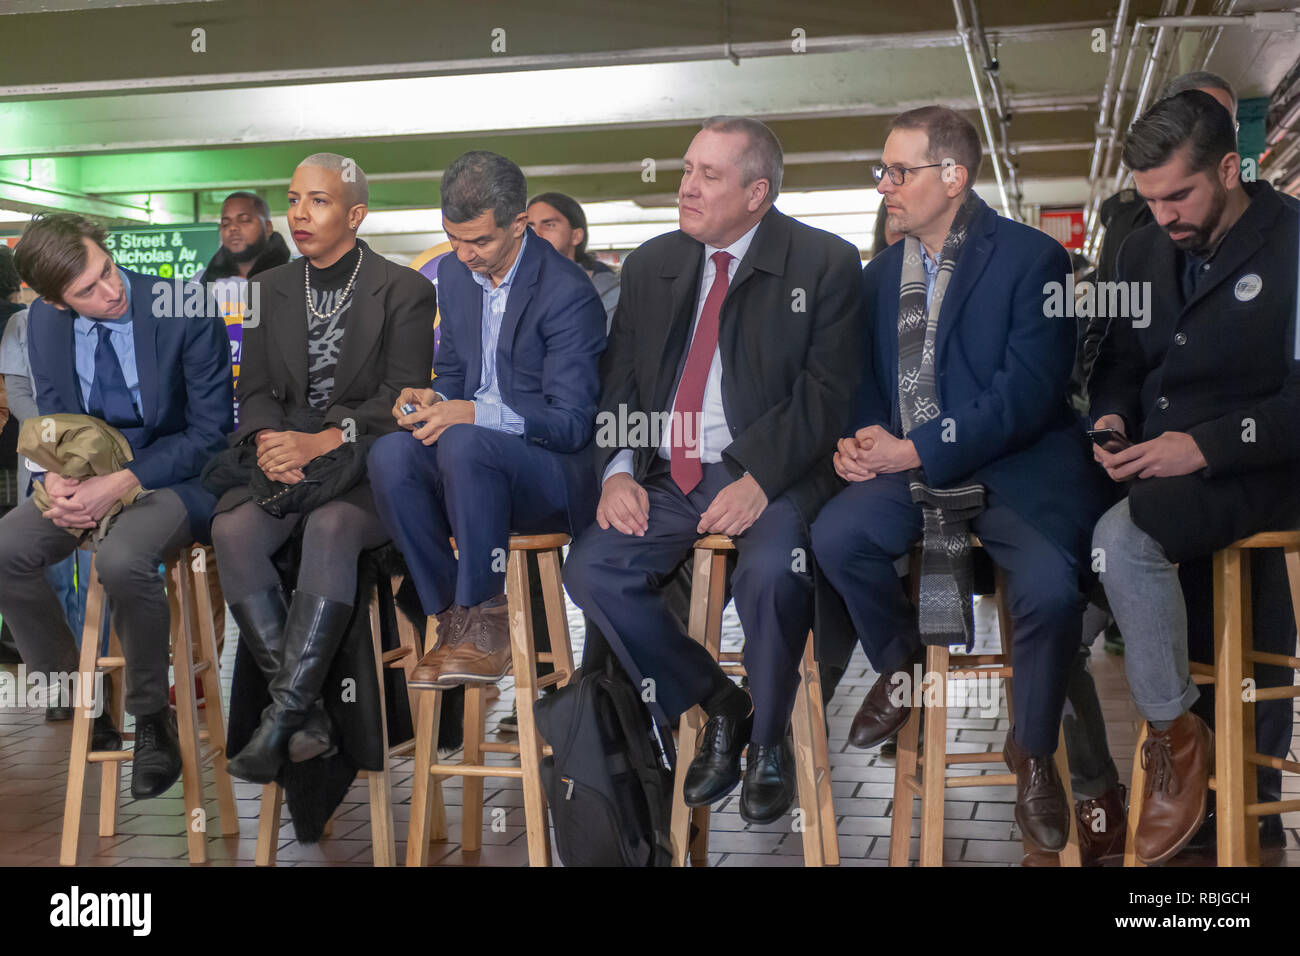 (L-R) City Councilmembers Steven Levin, Laurie Cumbo, Ydanis Rodrigues, Daniel Dromm, Mark Levine, and Rafael Espinal Jr. at the 125th Street IND subway station on Friday, January 4, 2019 for the roll-out of the Fair Fares program. The program provides half-price MetroCards to New Yorkers whose income falls below or is at the federal poverty level and are receiving SNAP benefits. (Â© Richard B. Levine) Stock Photo